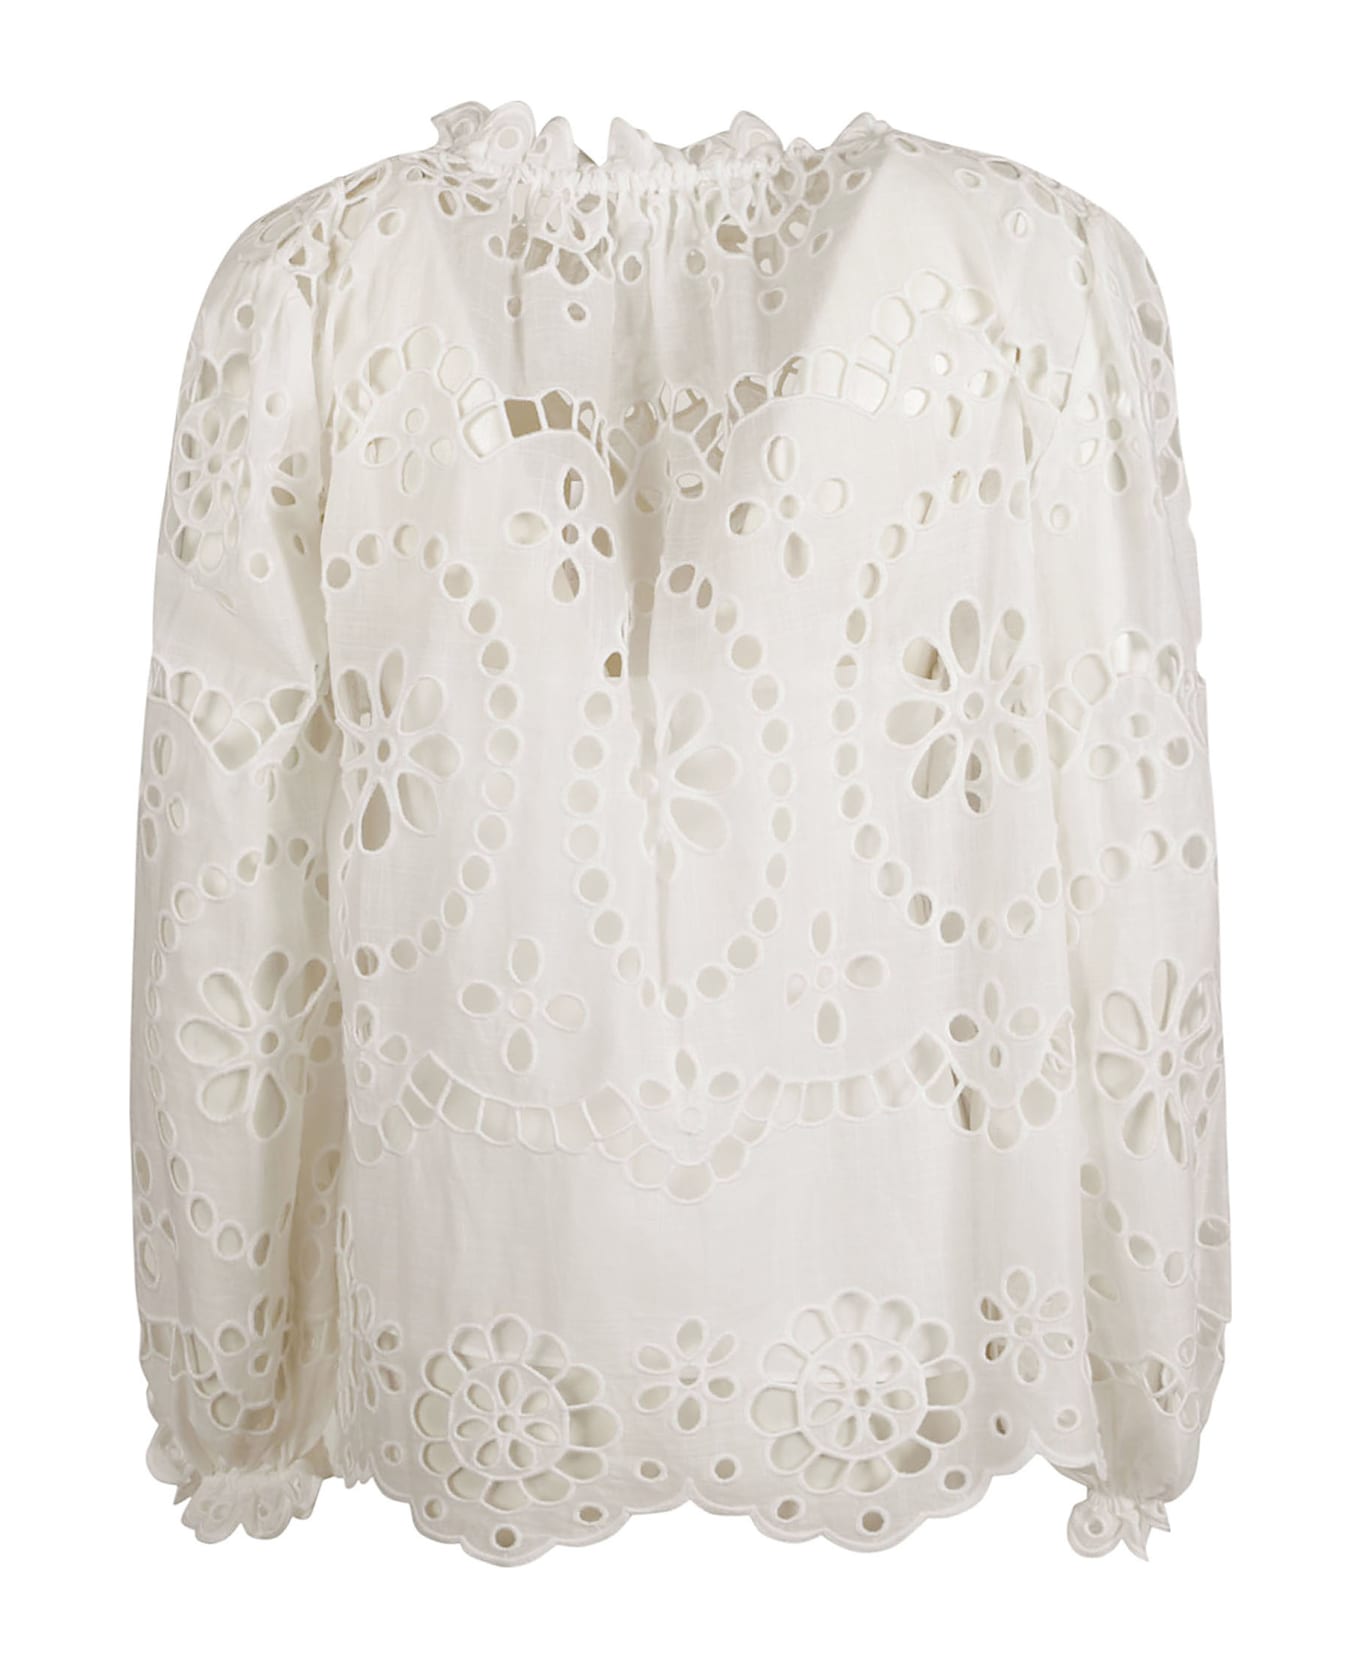 Zimmermann Lexi Embroidered Blouse - Bianco ブラウス